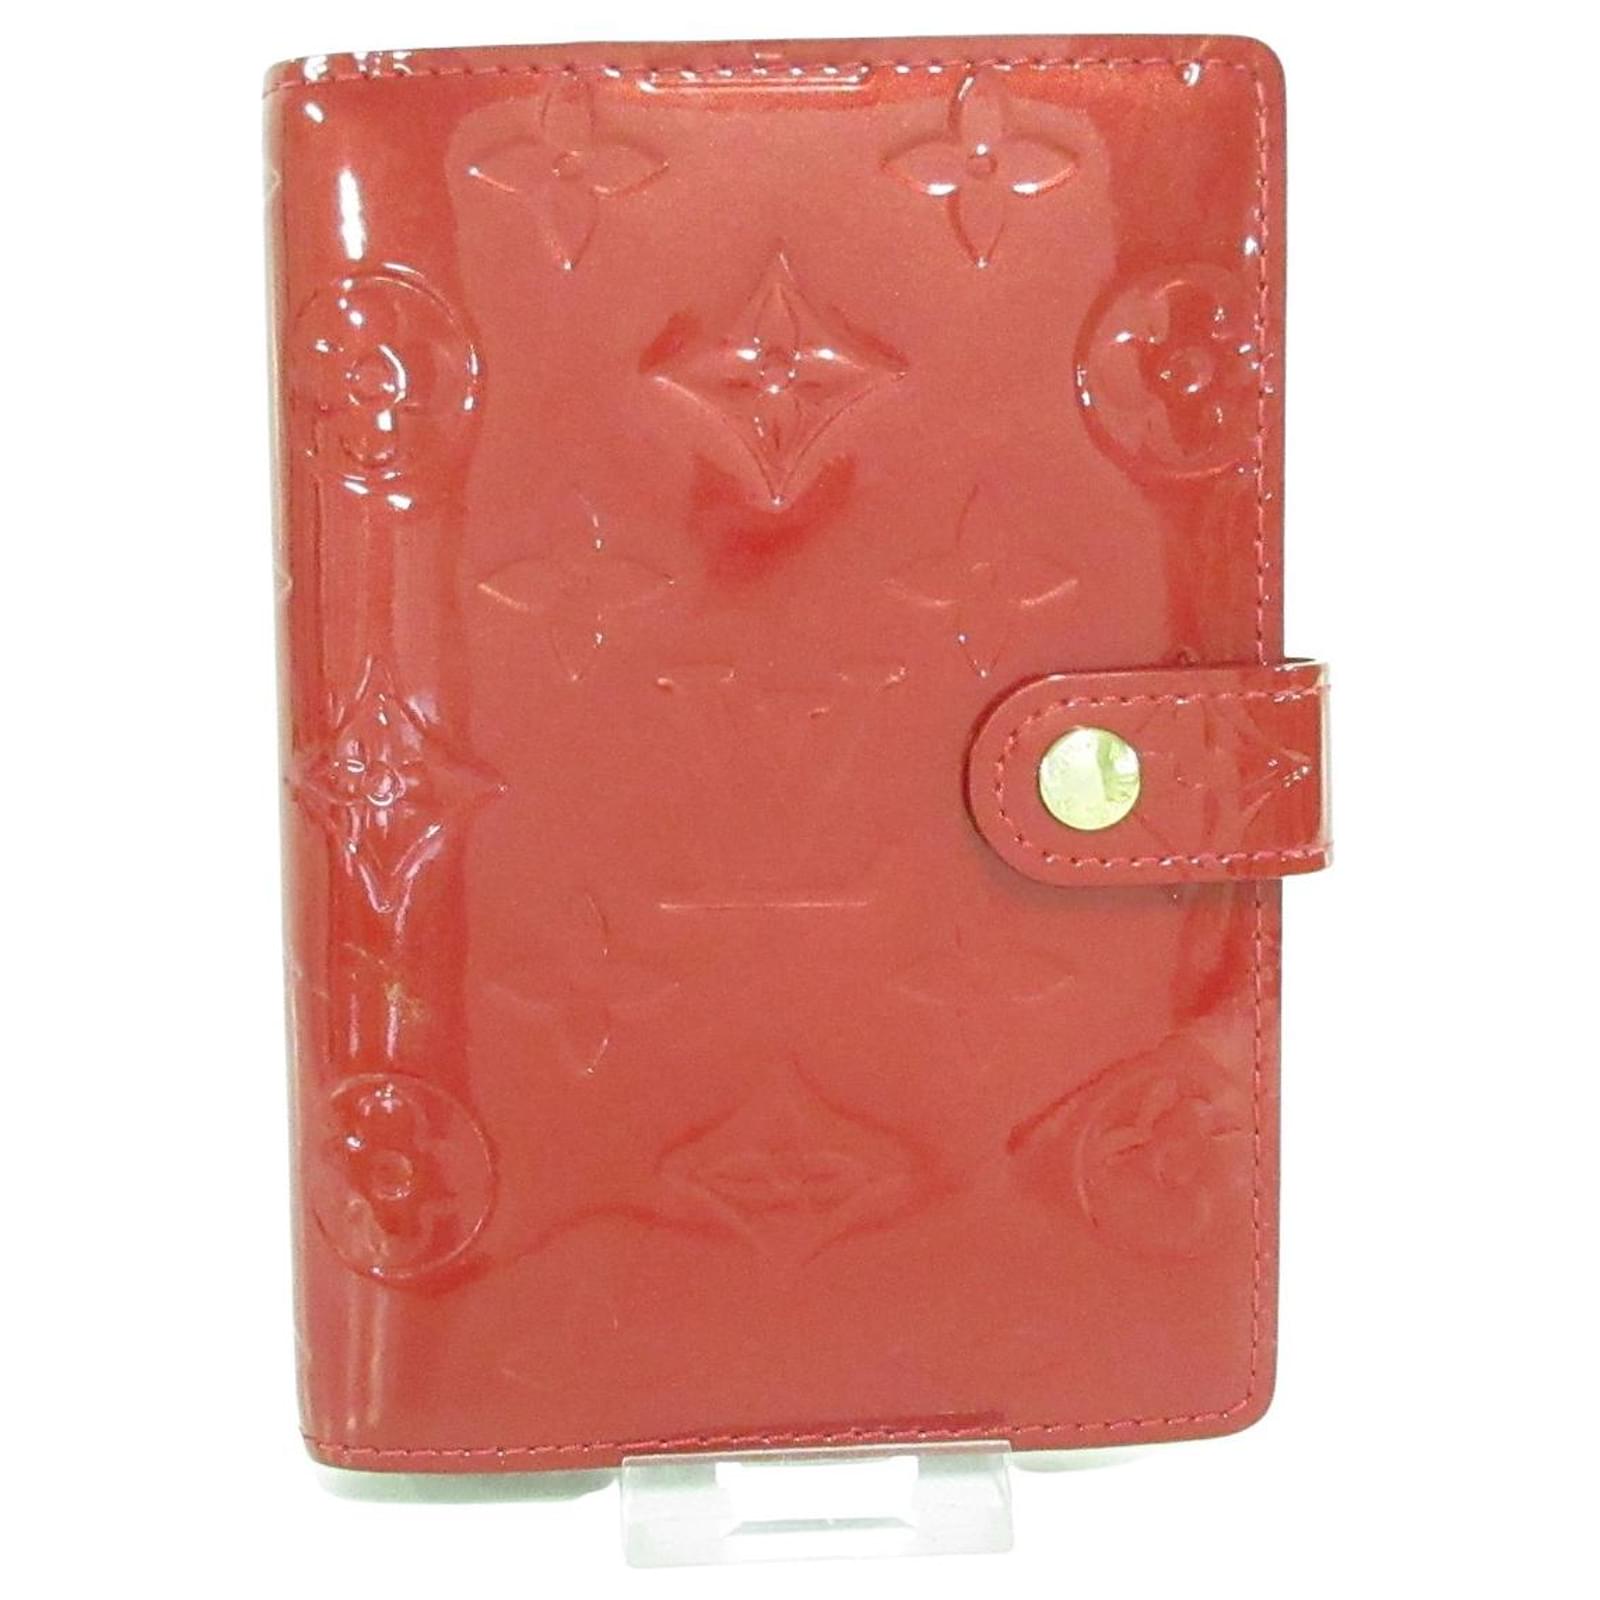 Authentic Louis Vuitton Red Patent Leather Agenda / Notebook